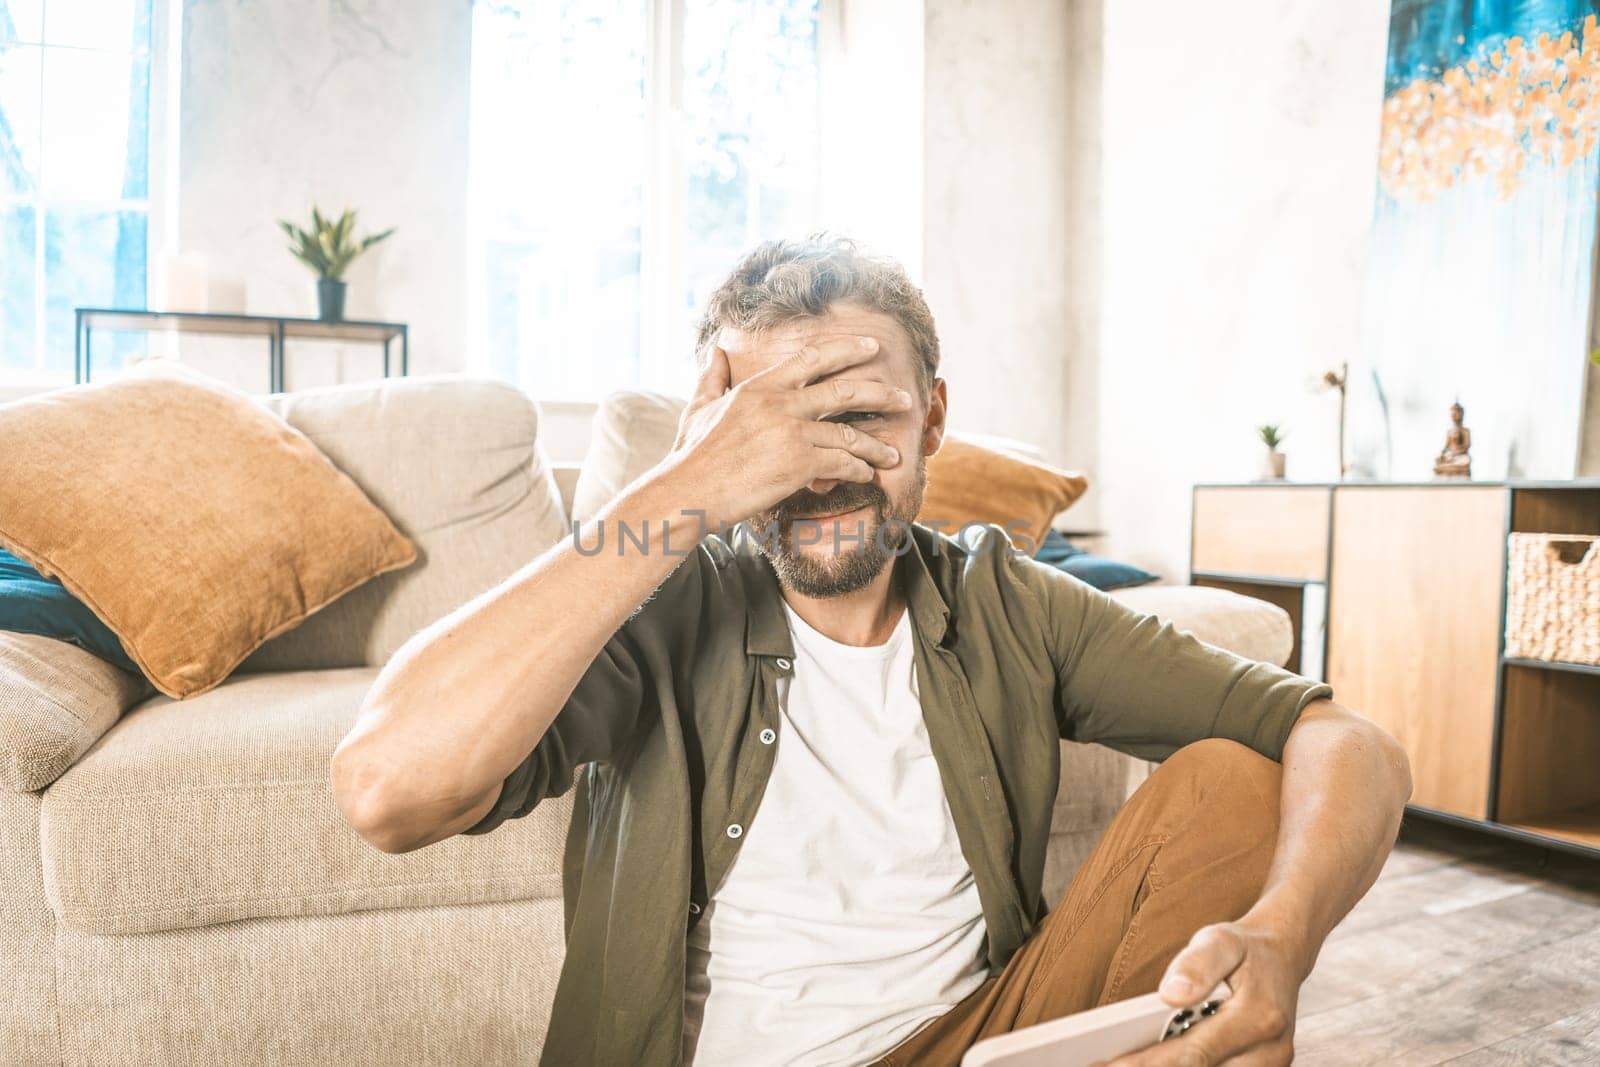 Cheater online. Man covering face with facepalm, holding mobile phone. Hacker concept. He may have been caught doing something wrong or possibly caught in act of hacking or online fraud. by LipikStockMedia